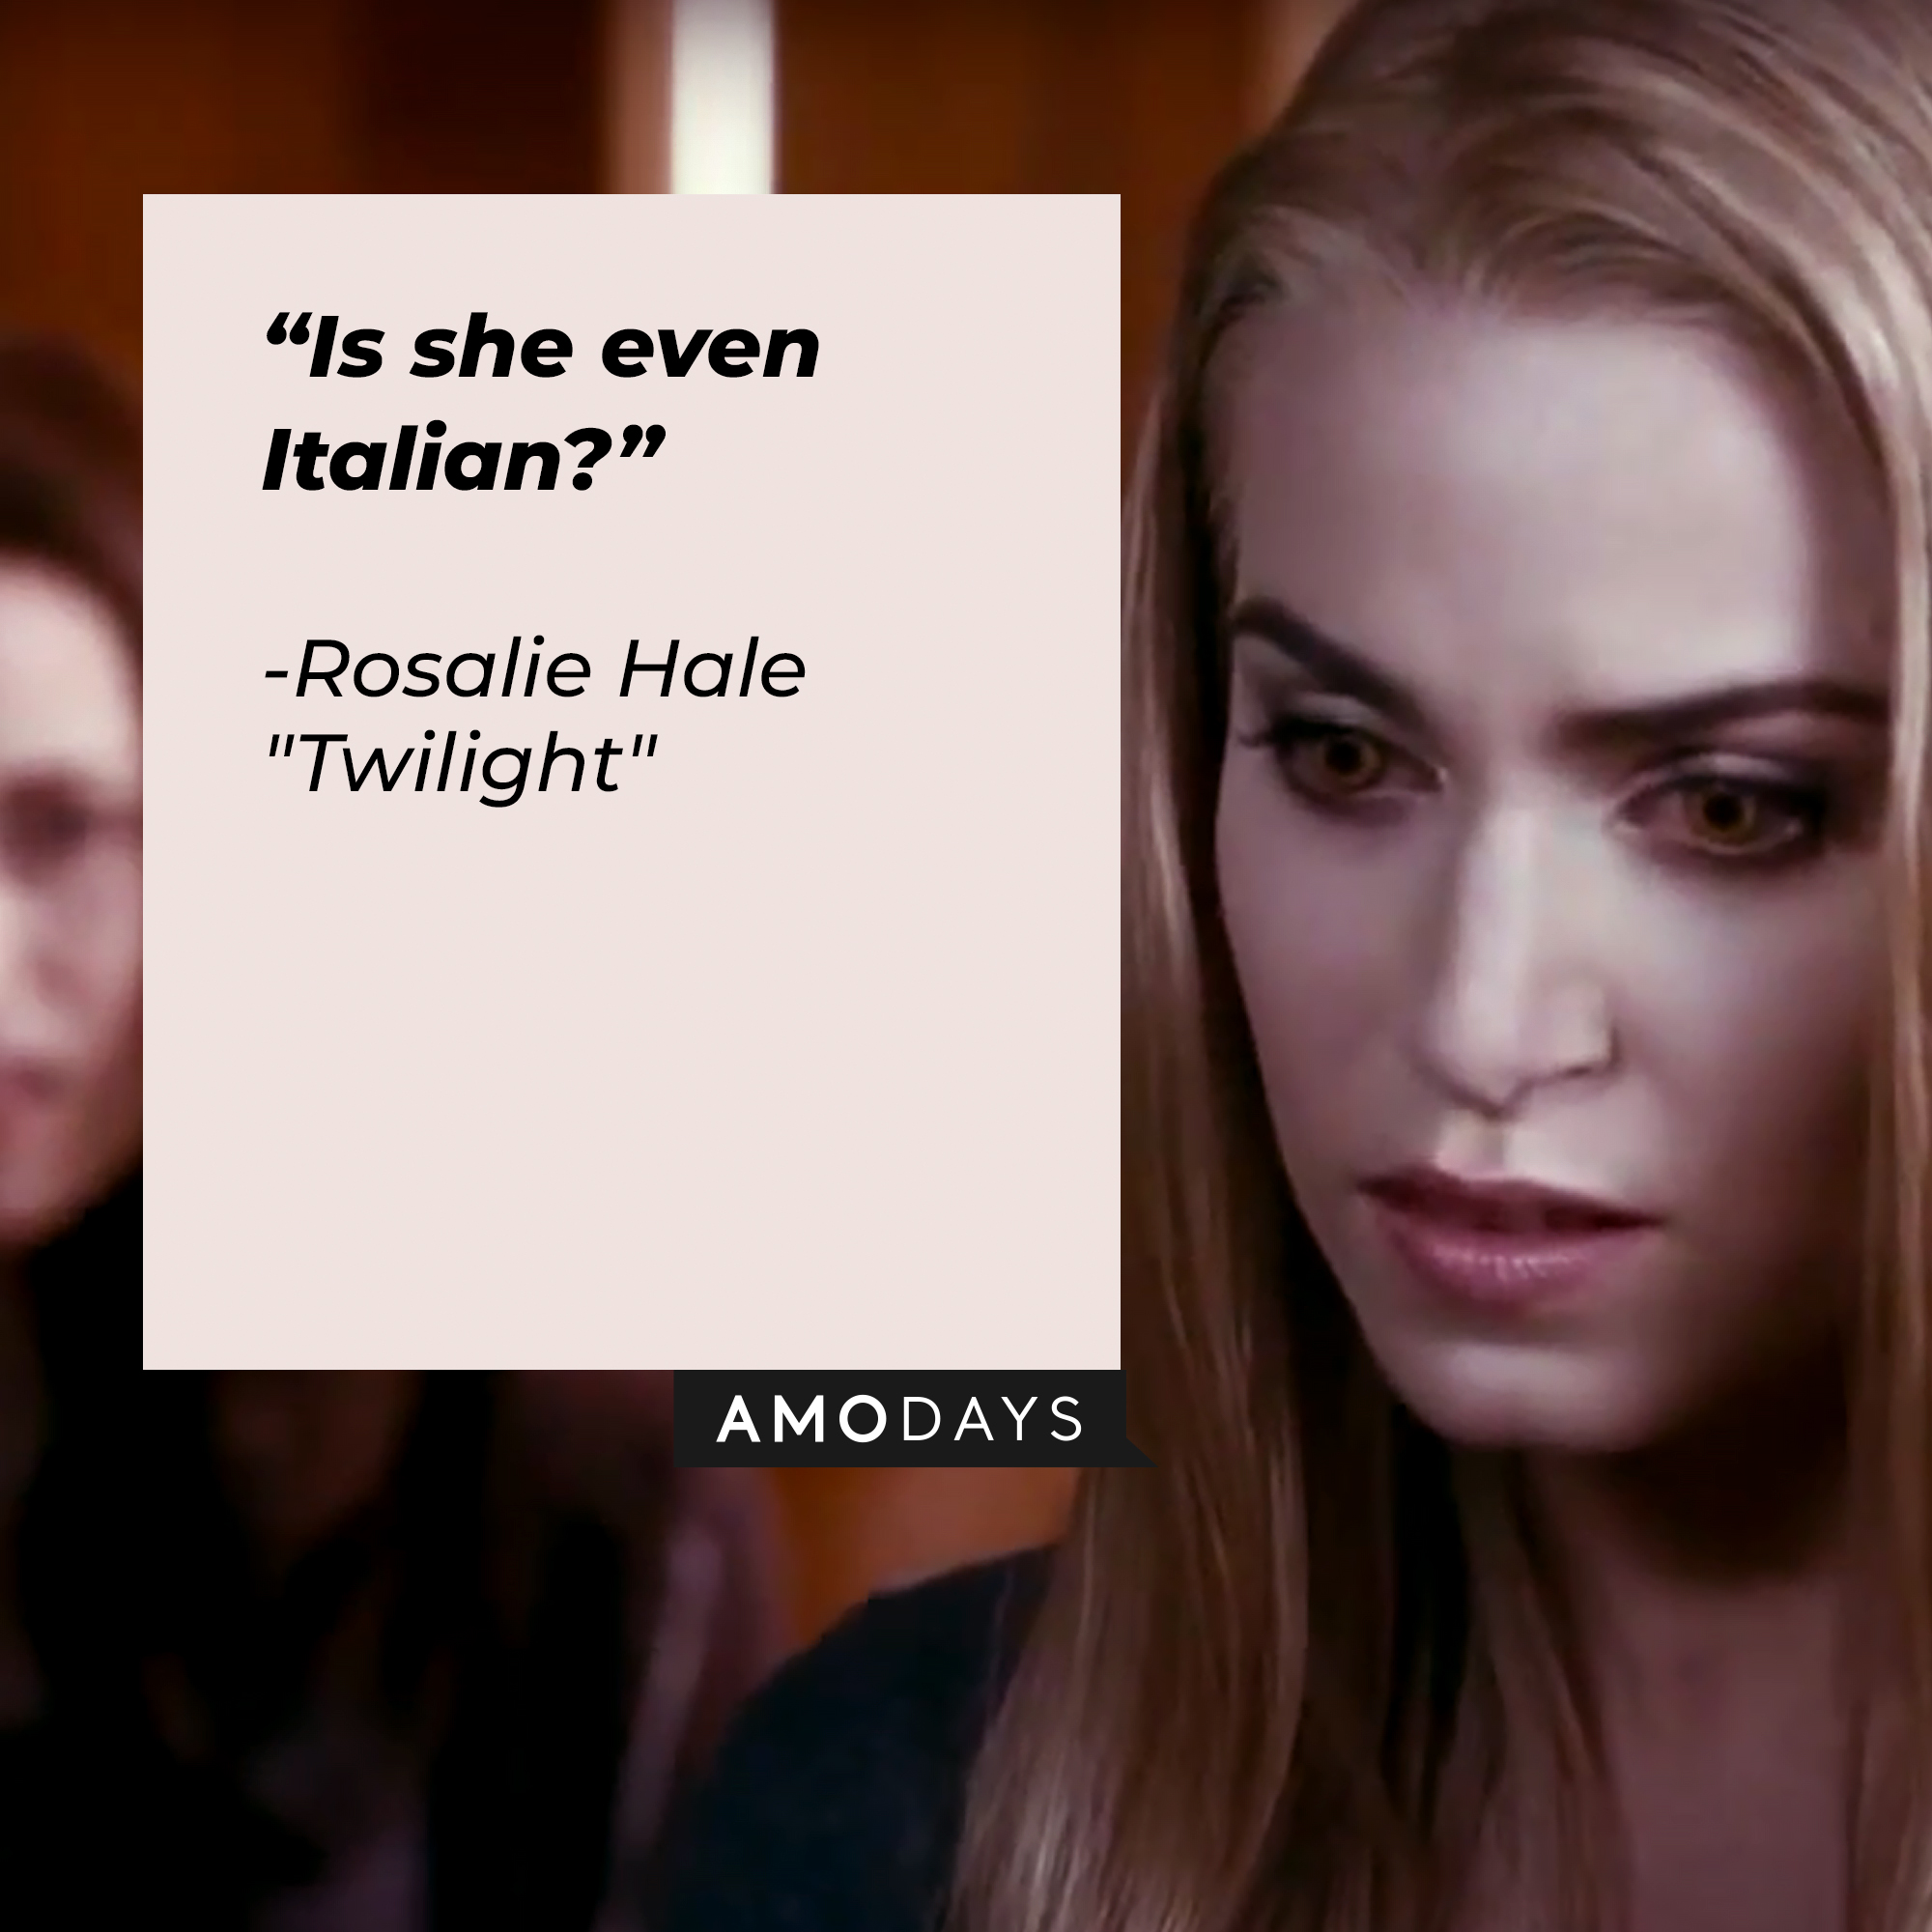 Rosalie Hale with her quote: “Is she even Italian?” | Source: Facebook.com/twilight